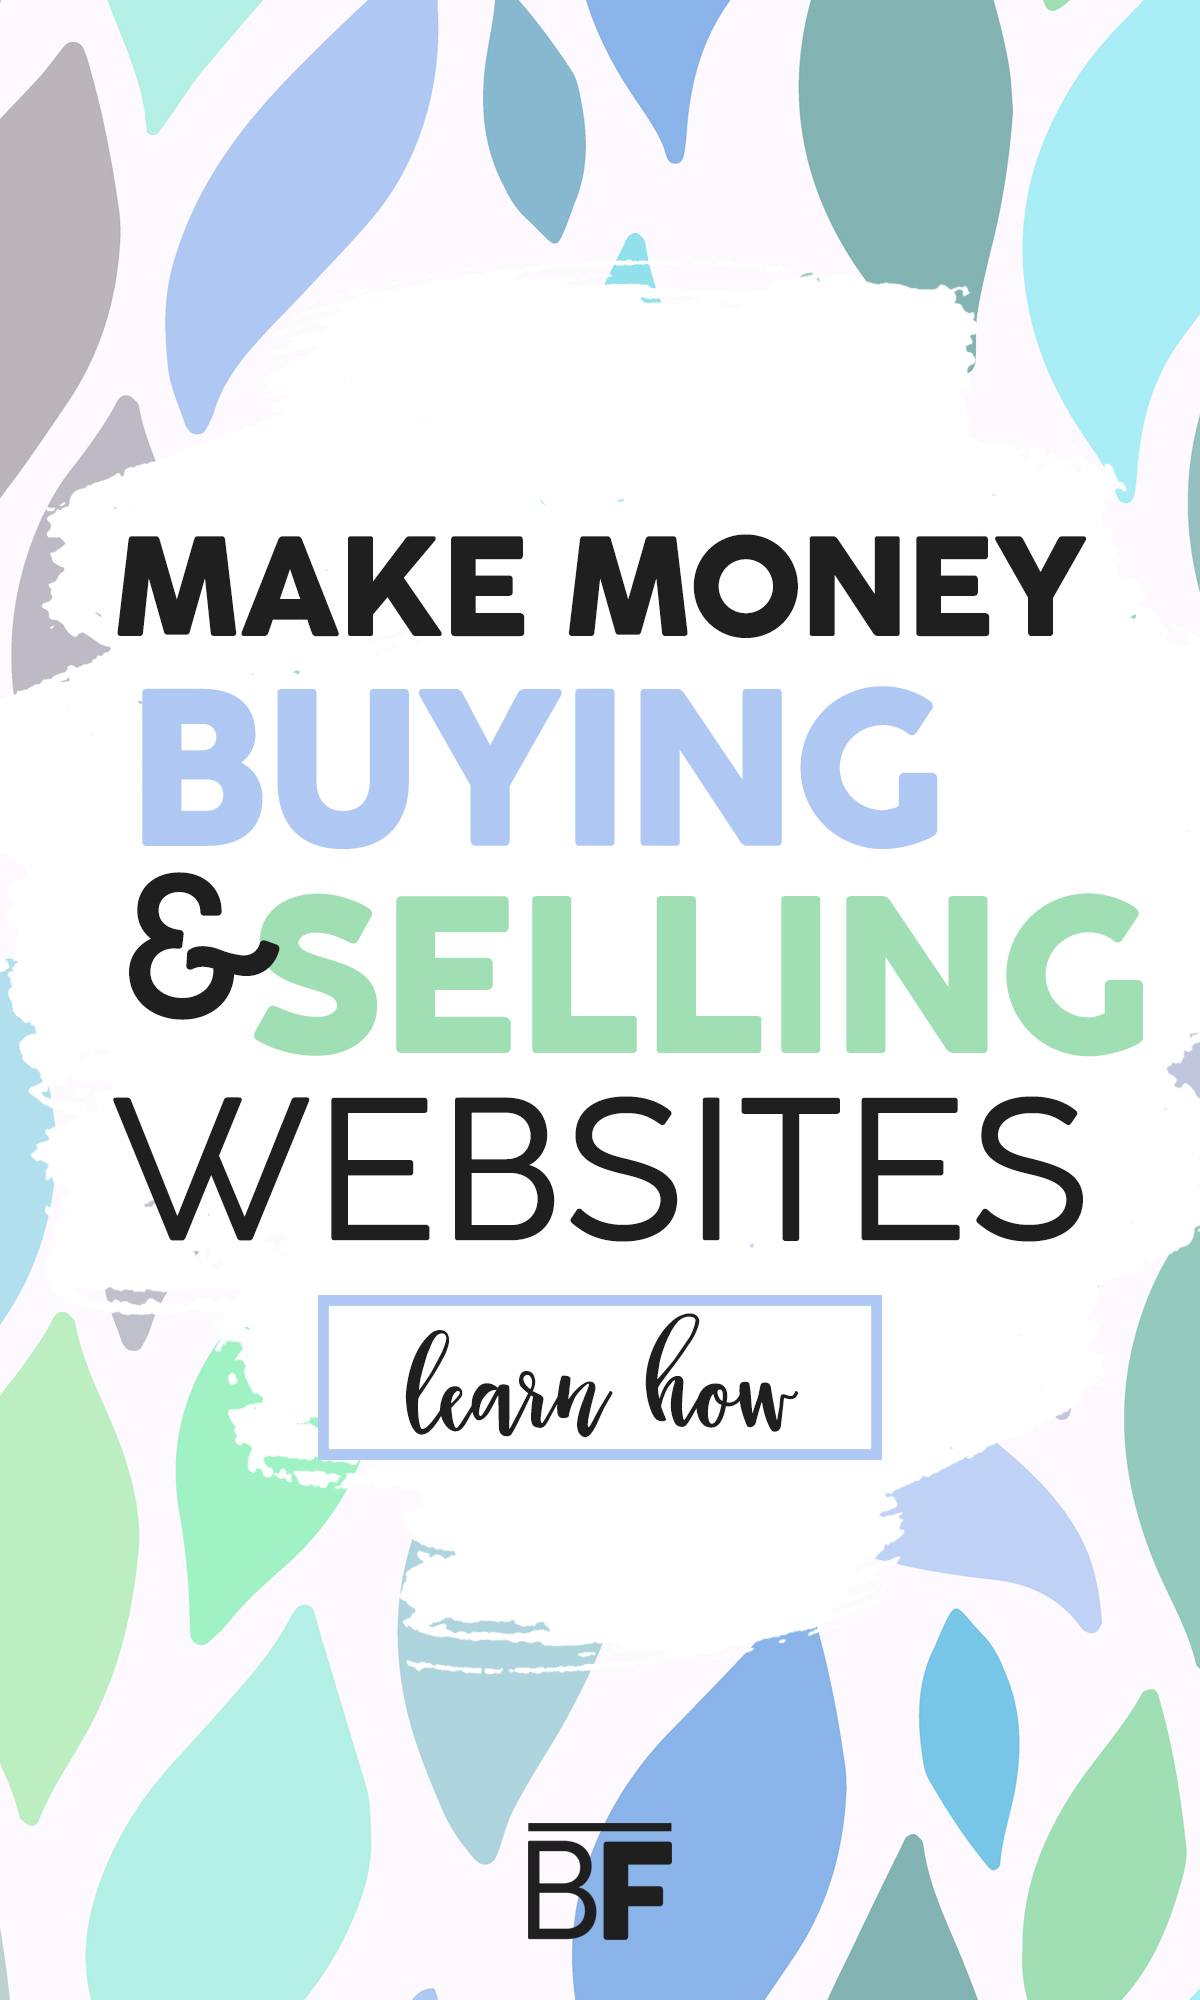 Learn how to make money flipping blogs! Make money buying and selling websites, blogs, ecommerce stores and more! This lucrative business has the potential to earn you tens of thousands if you implement ads, affiliate marketing, products and more. #makemoneyblogging #blogflipping 